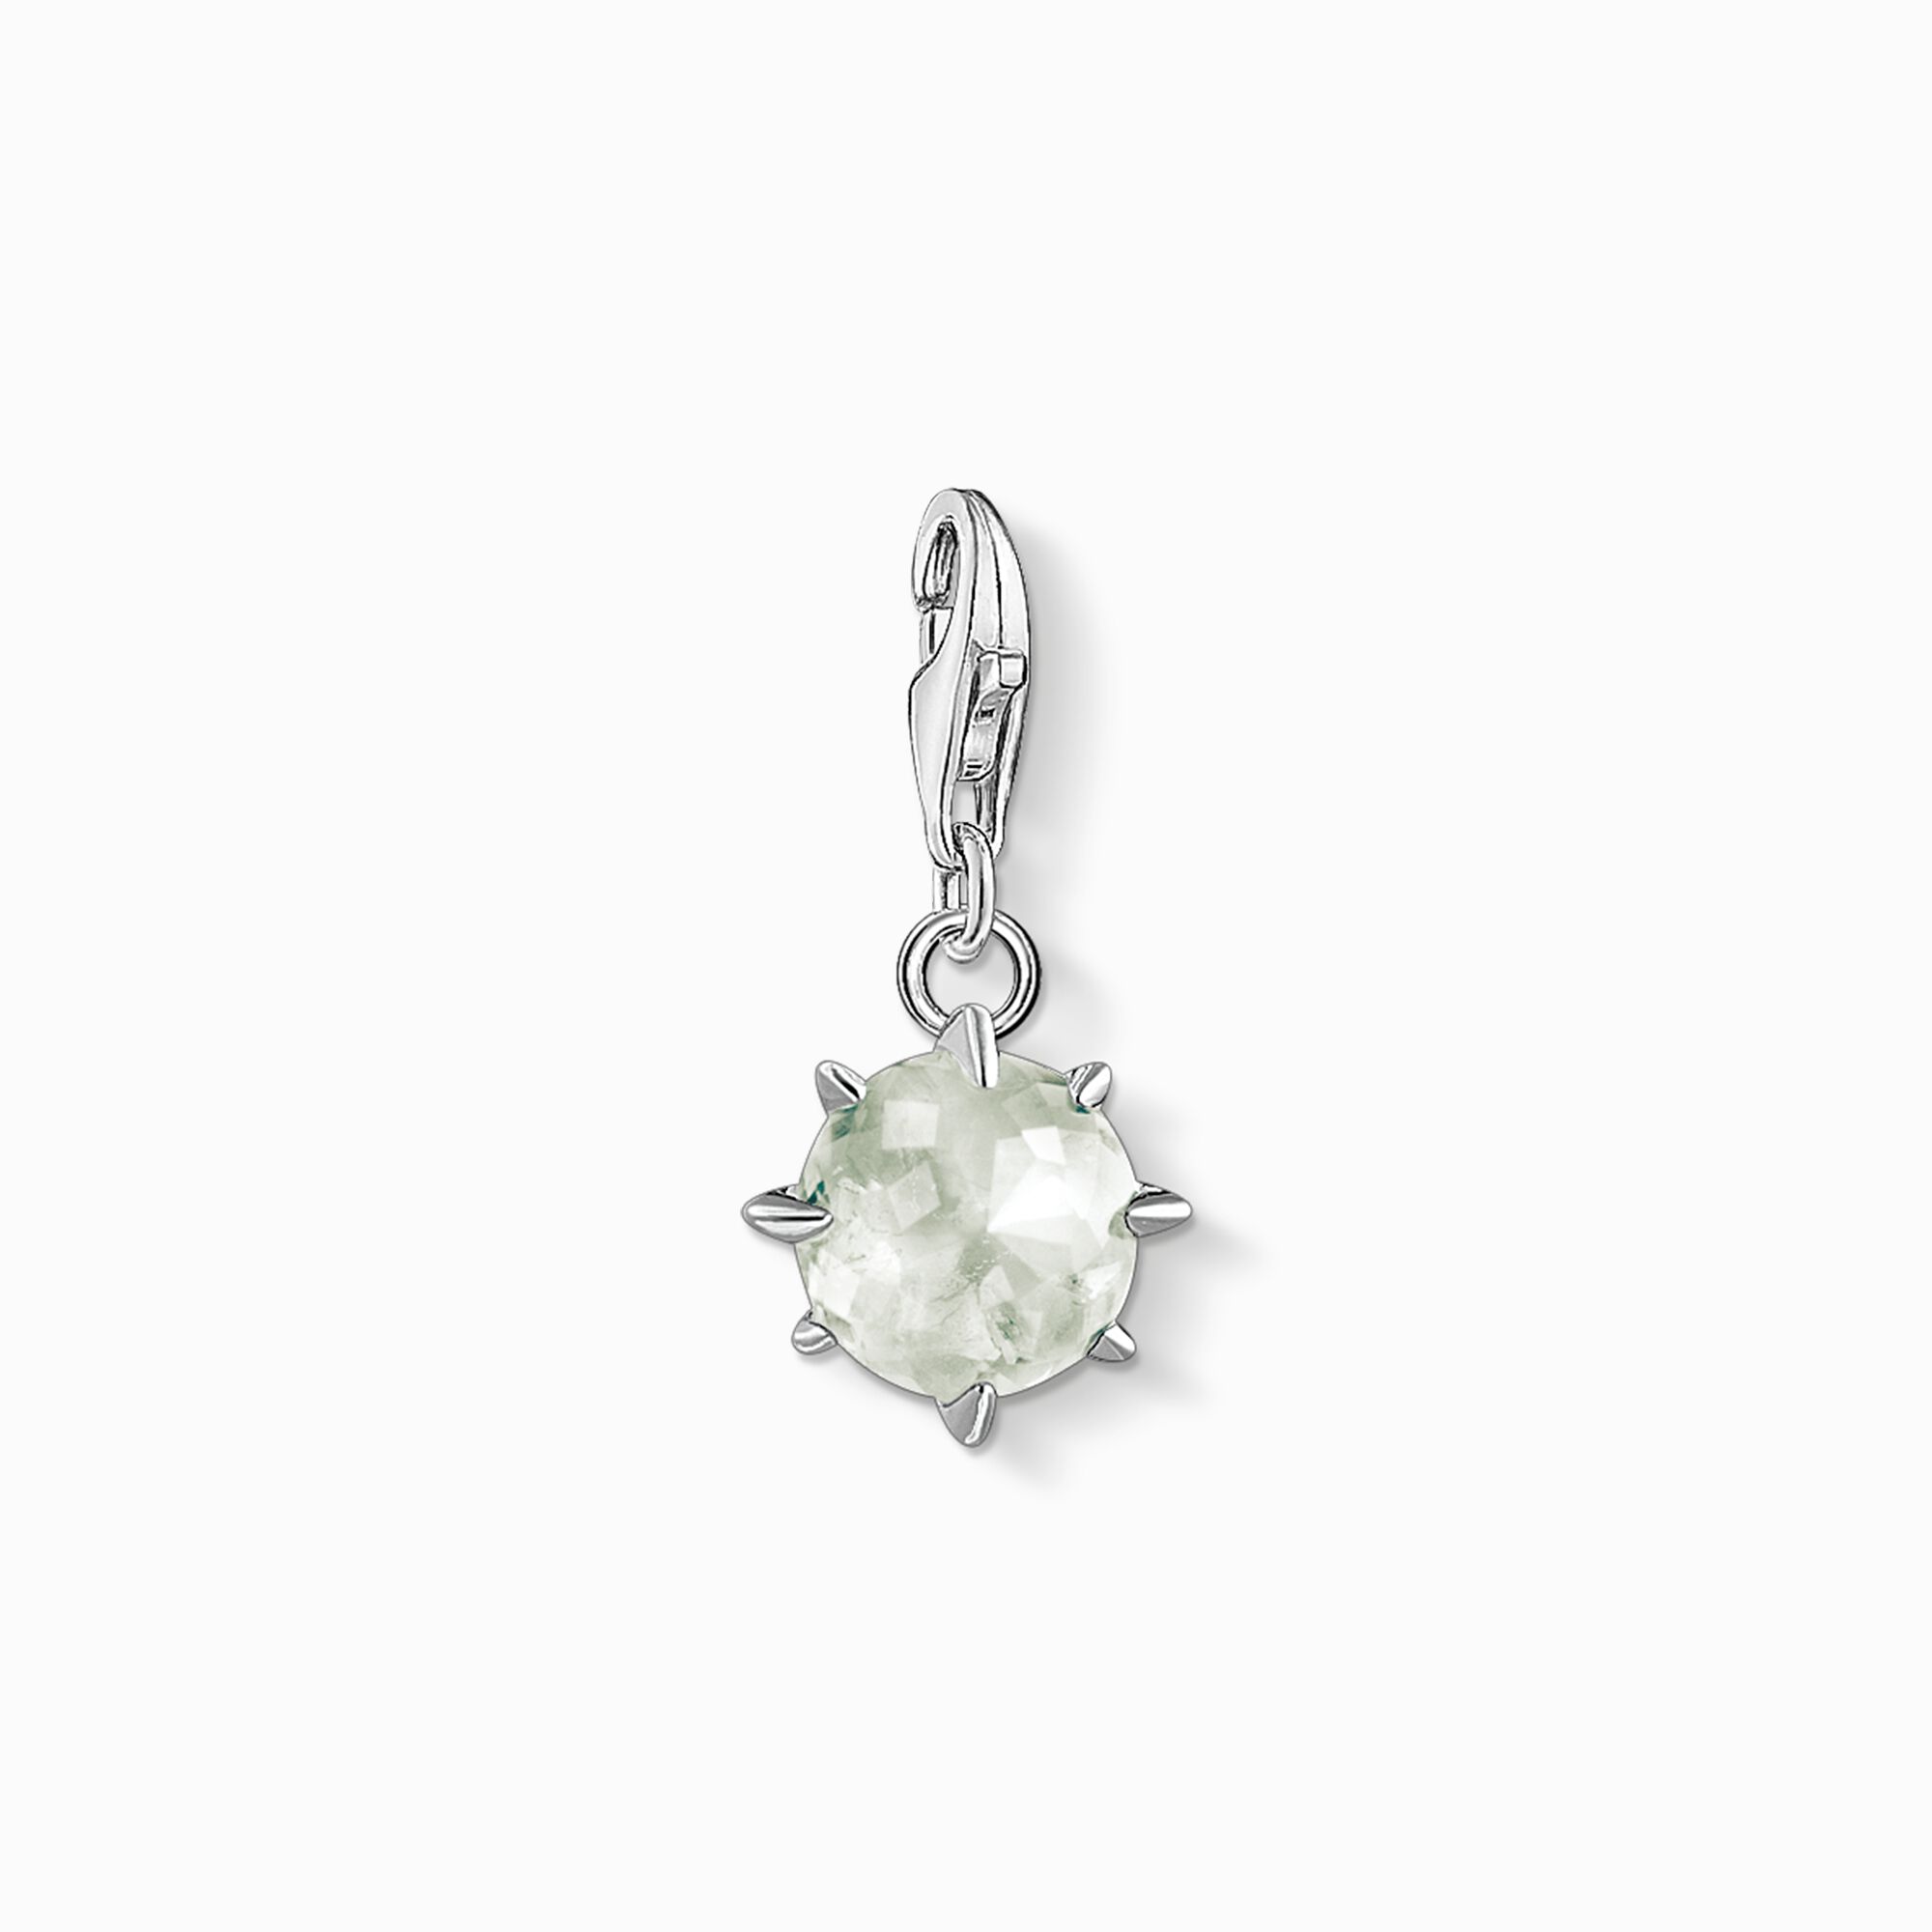 Charm pendant birth stone August from the Charm Club collection in the THOMAS SABO online store